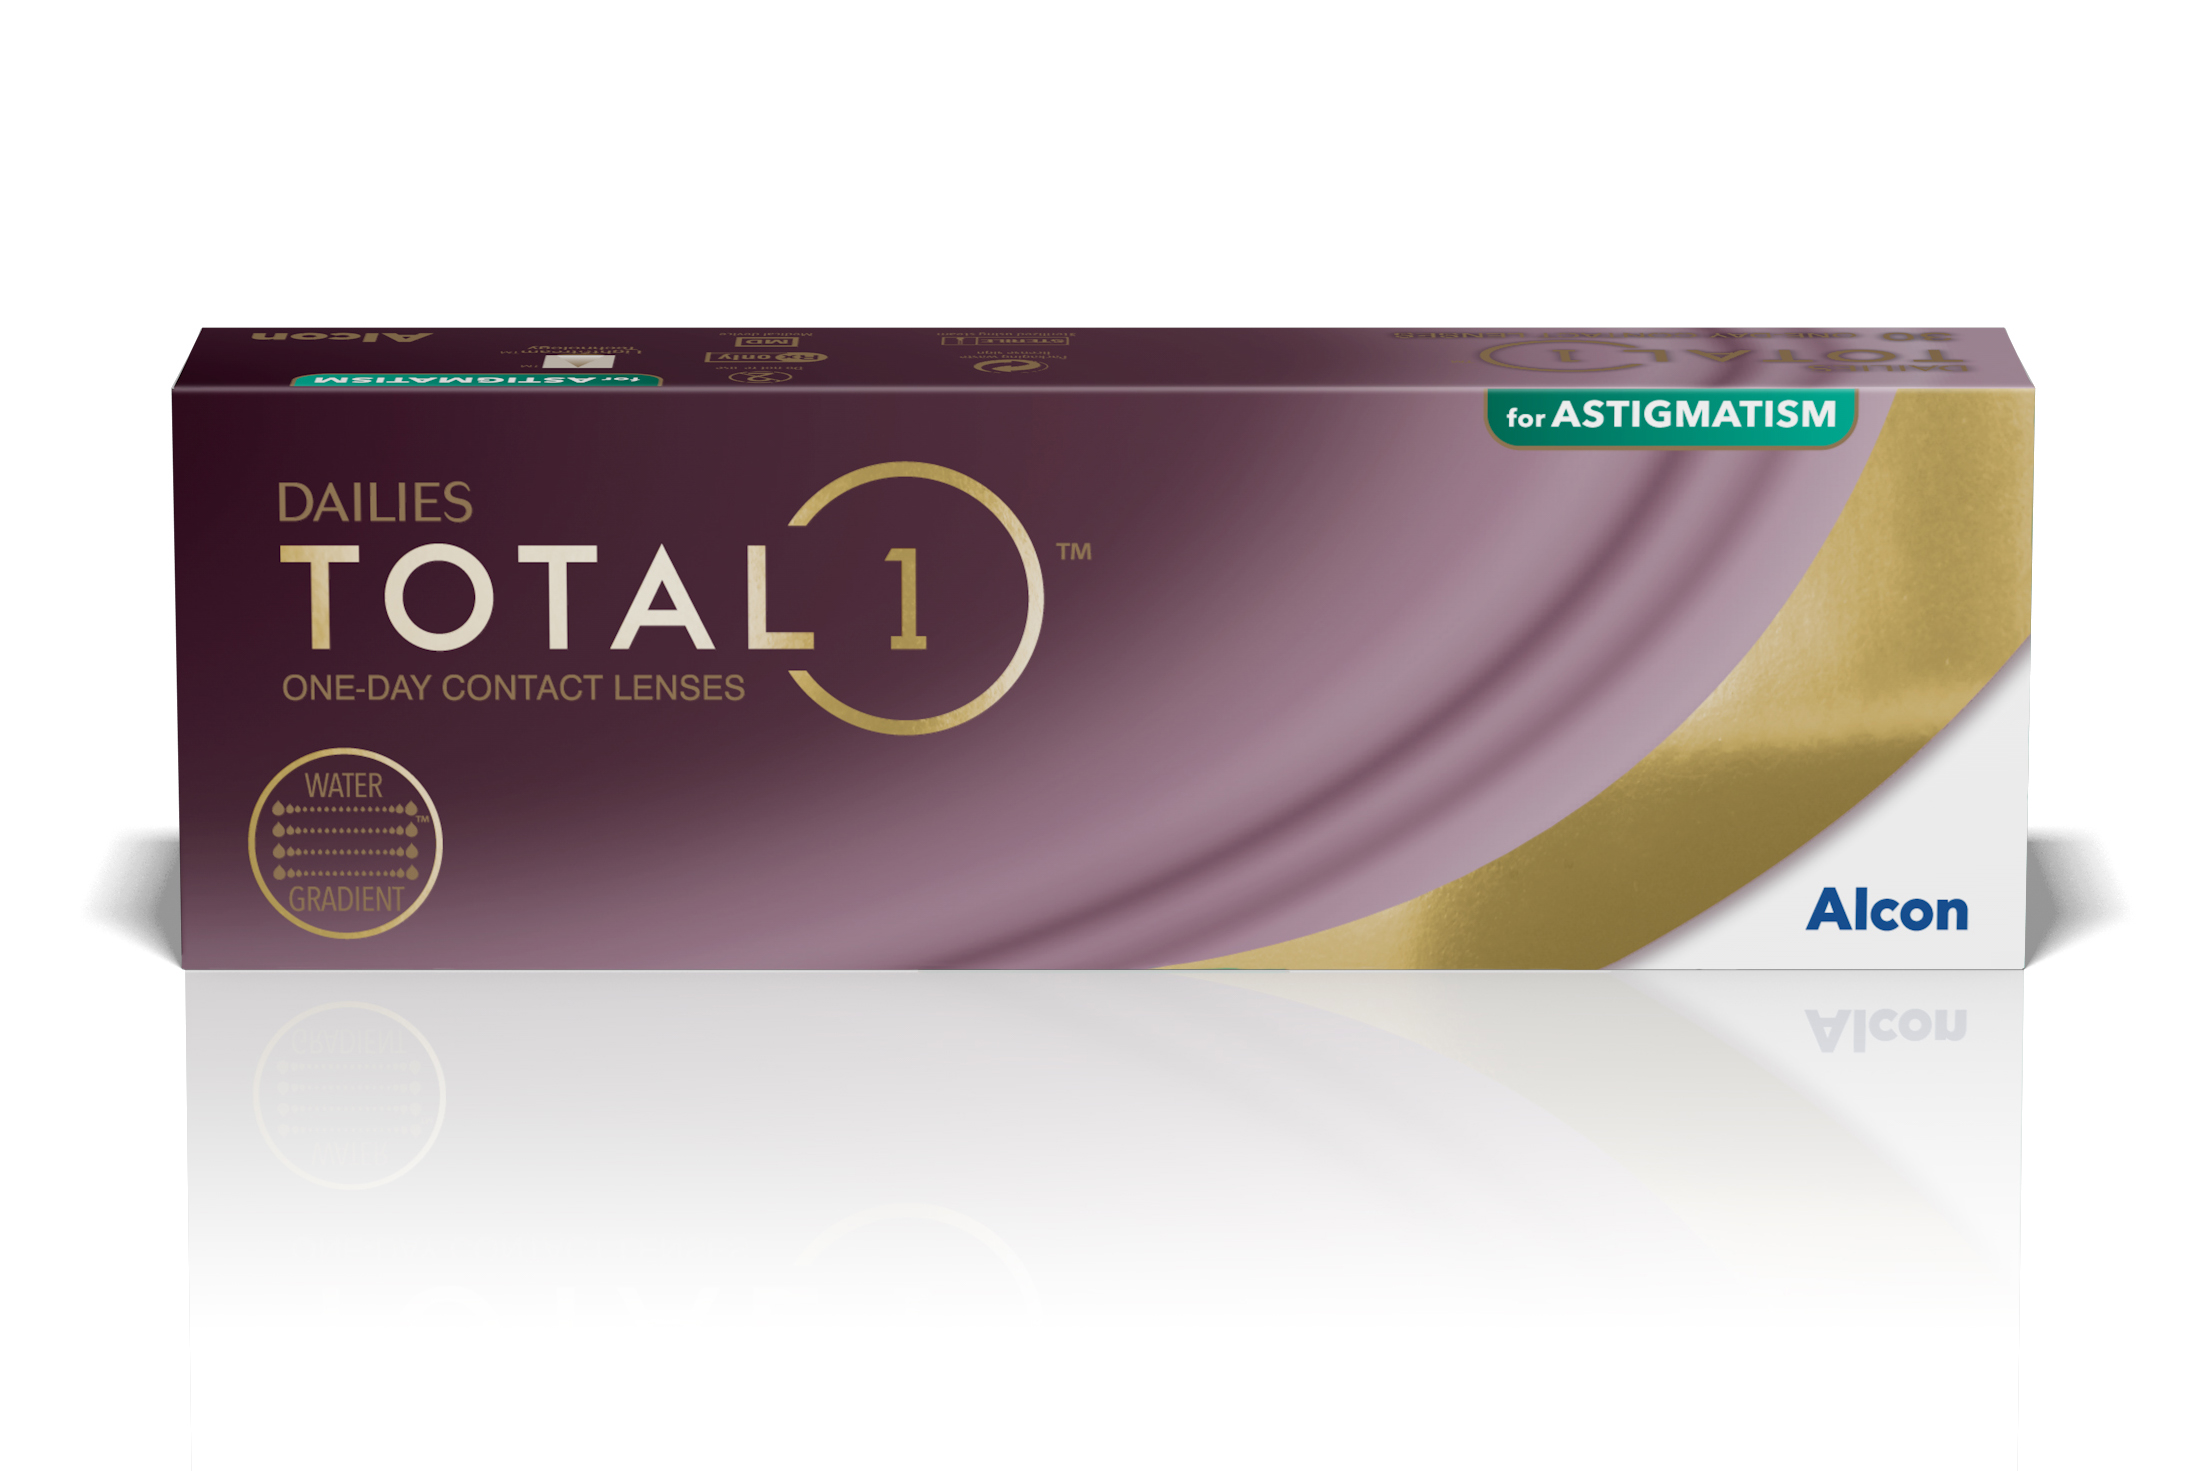 DAILIES TOTAL 1 for Astigmatism 30 Pack large view angle 0